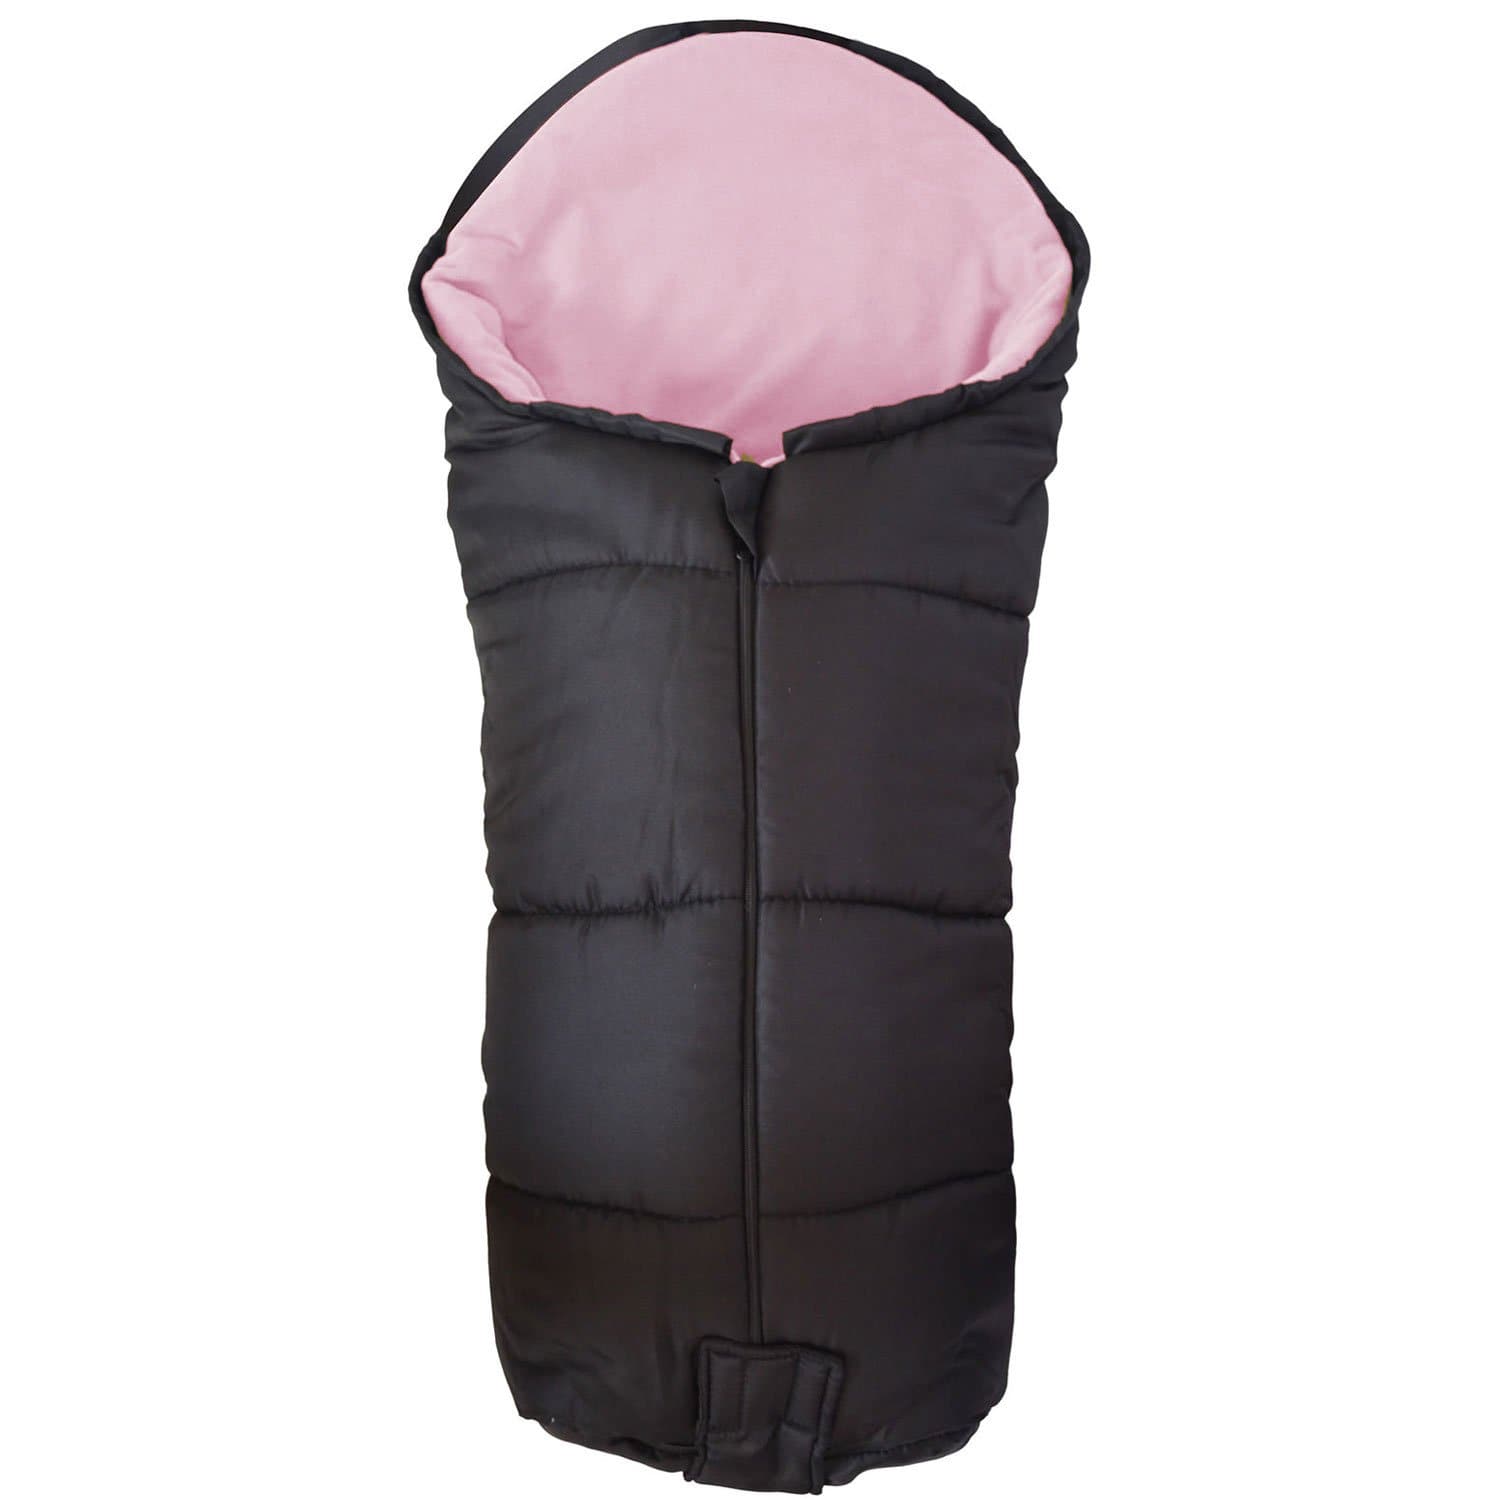 Deluxe Footmuff / Cosy Toes Compatible with Zeta - Light Pink / Fits All Models | For Your Little One